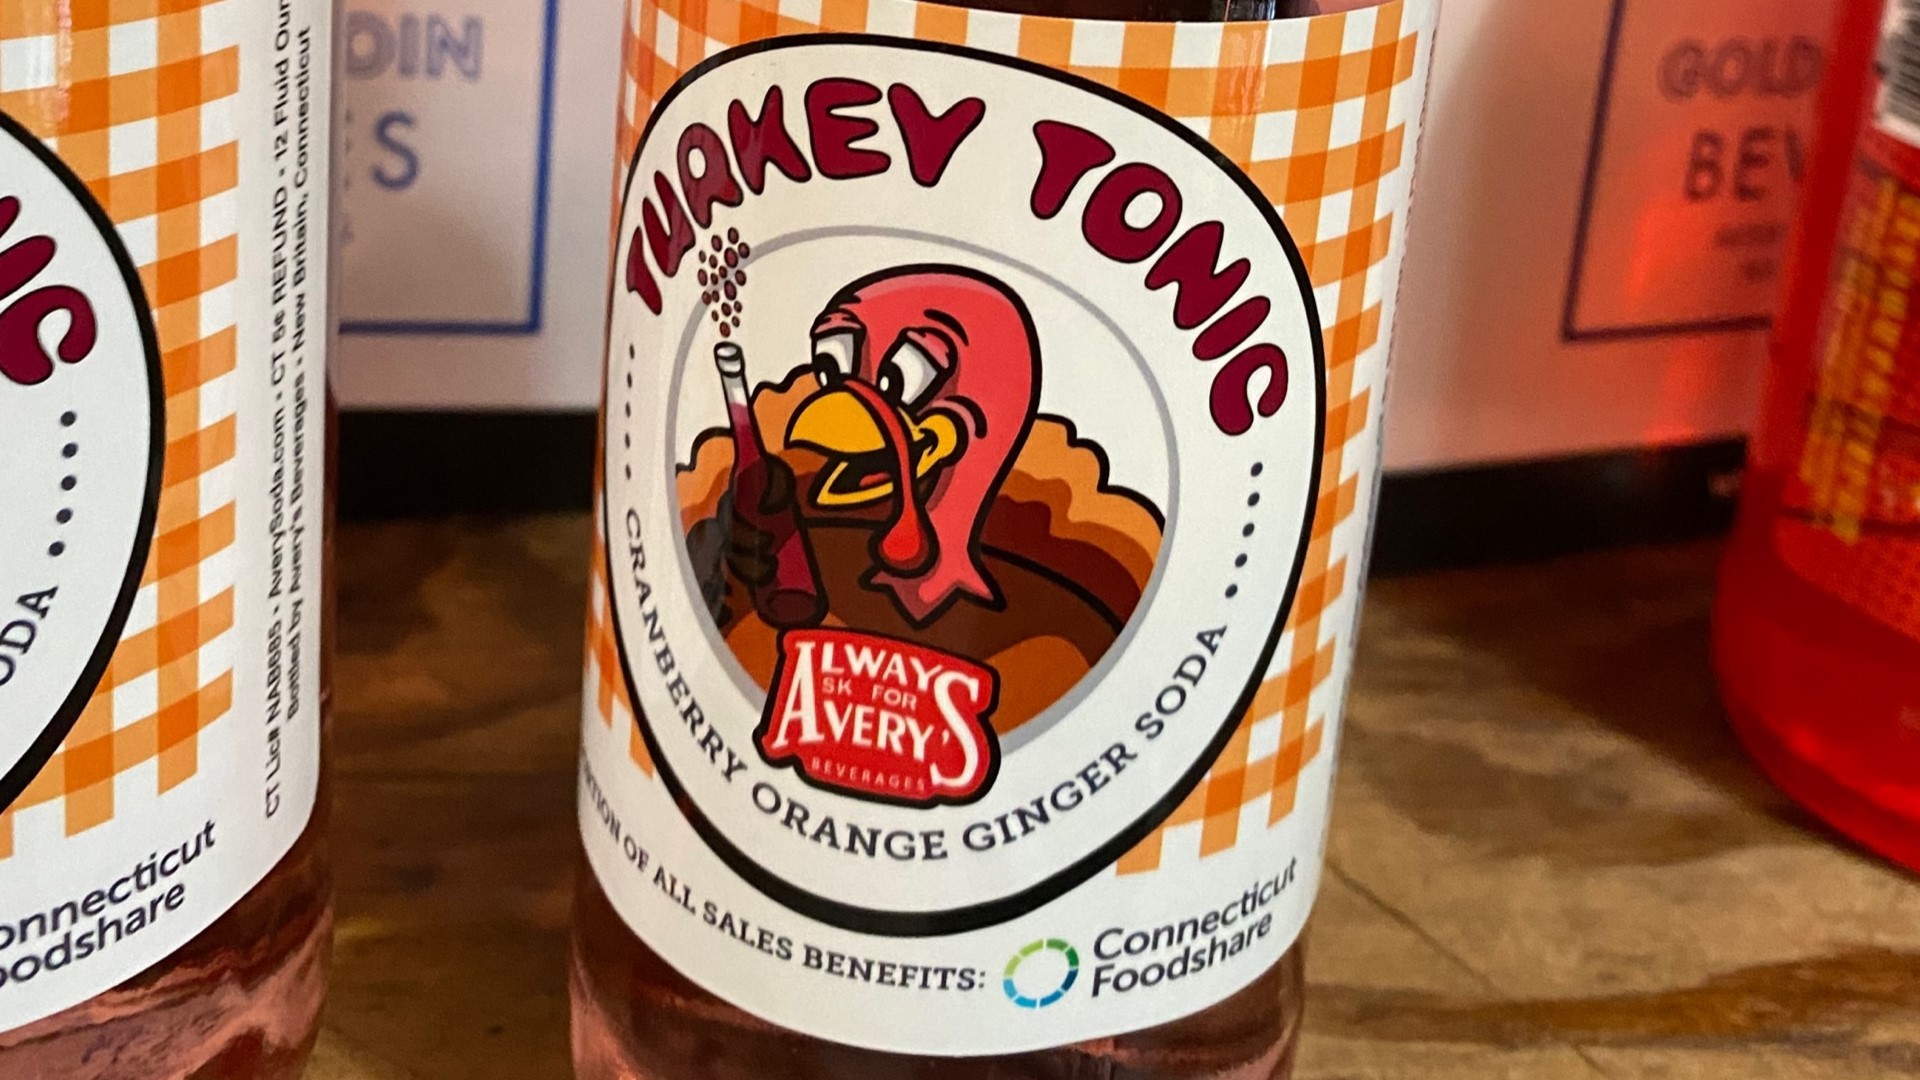 “Turkey Tonic” is a blend of cranberry, orange, and ginger flavors meant to compliment the holiday season. This concoction from Avery's Soda benefits CT Foodshare.